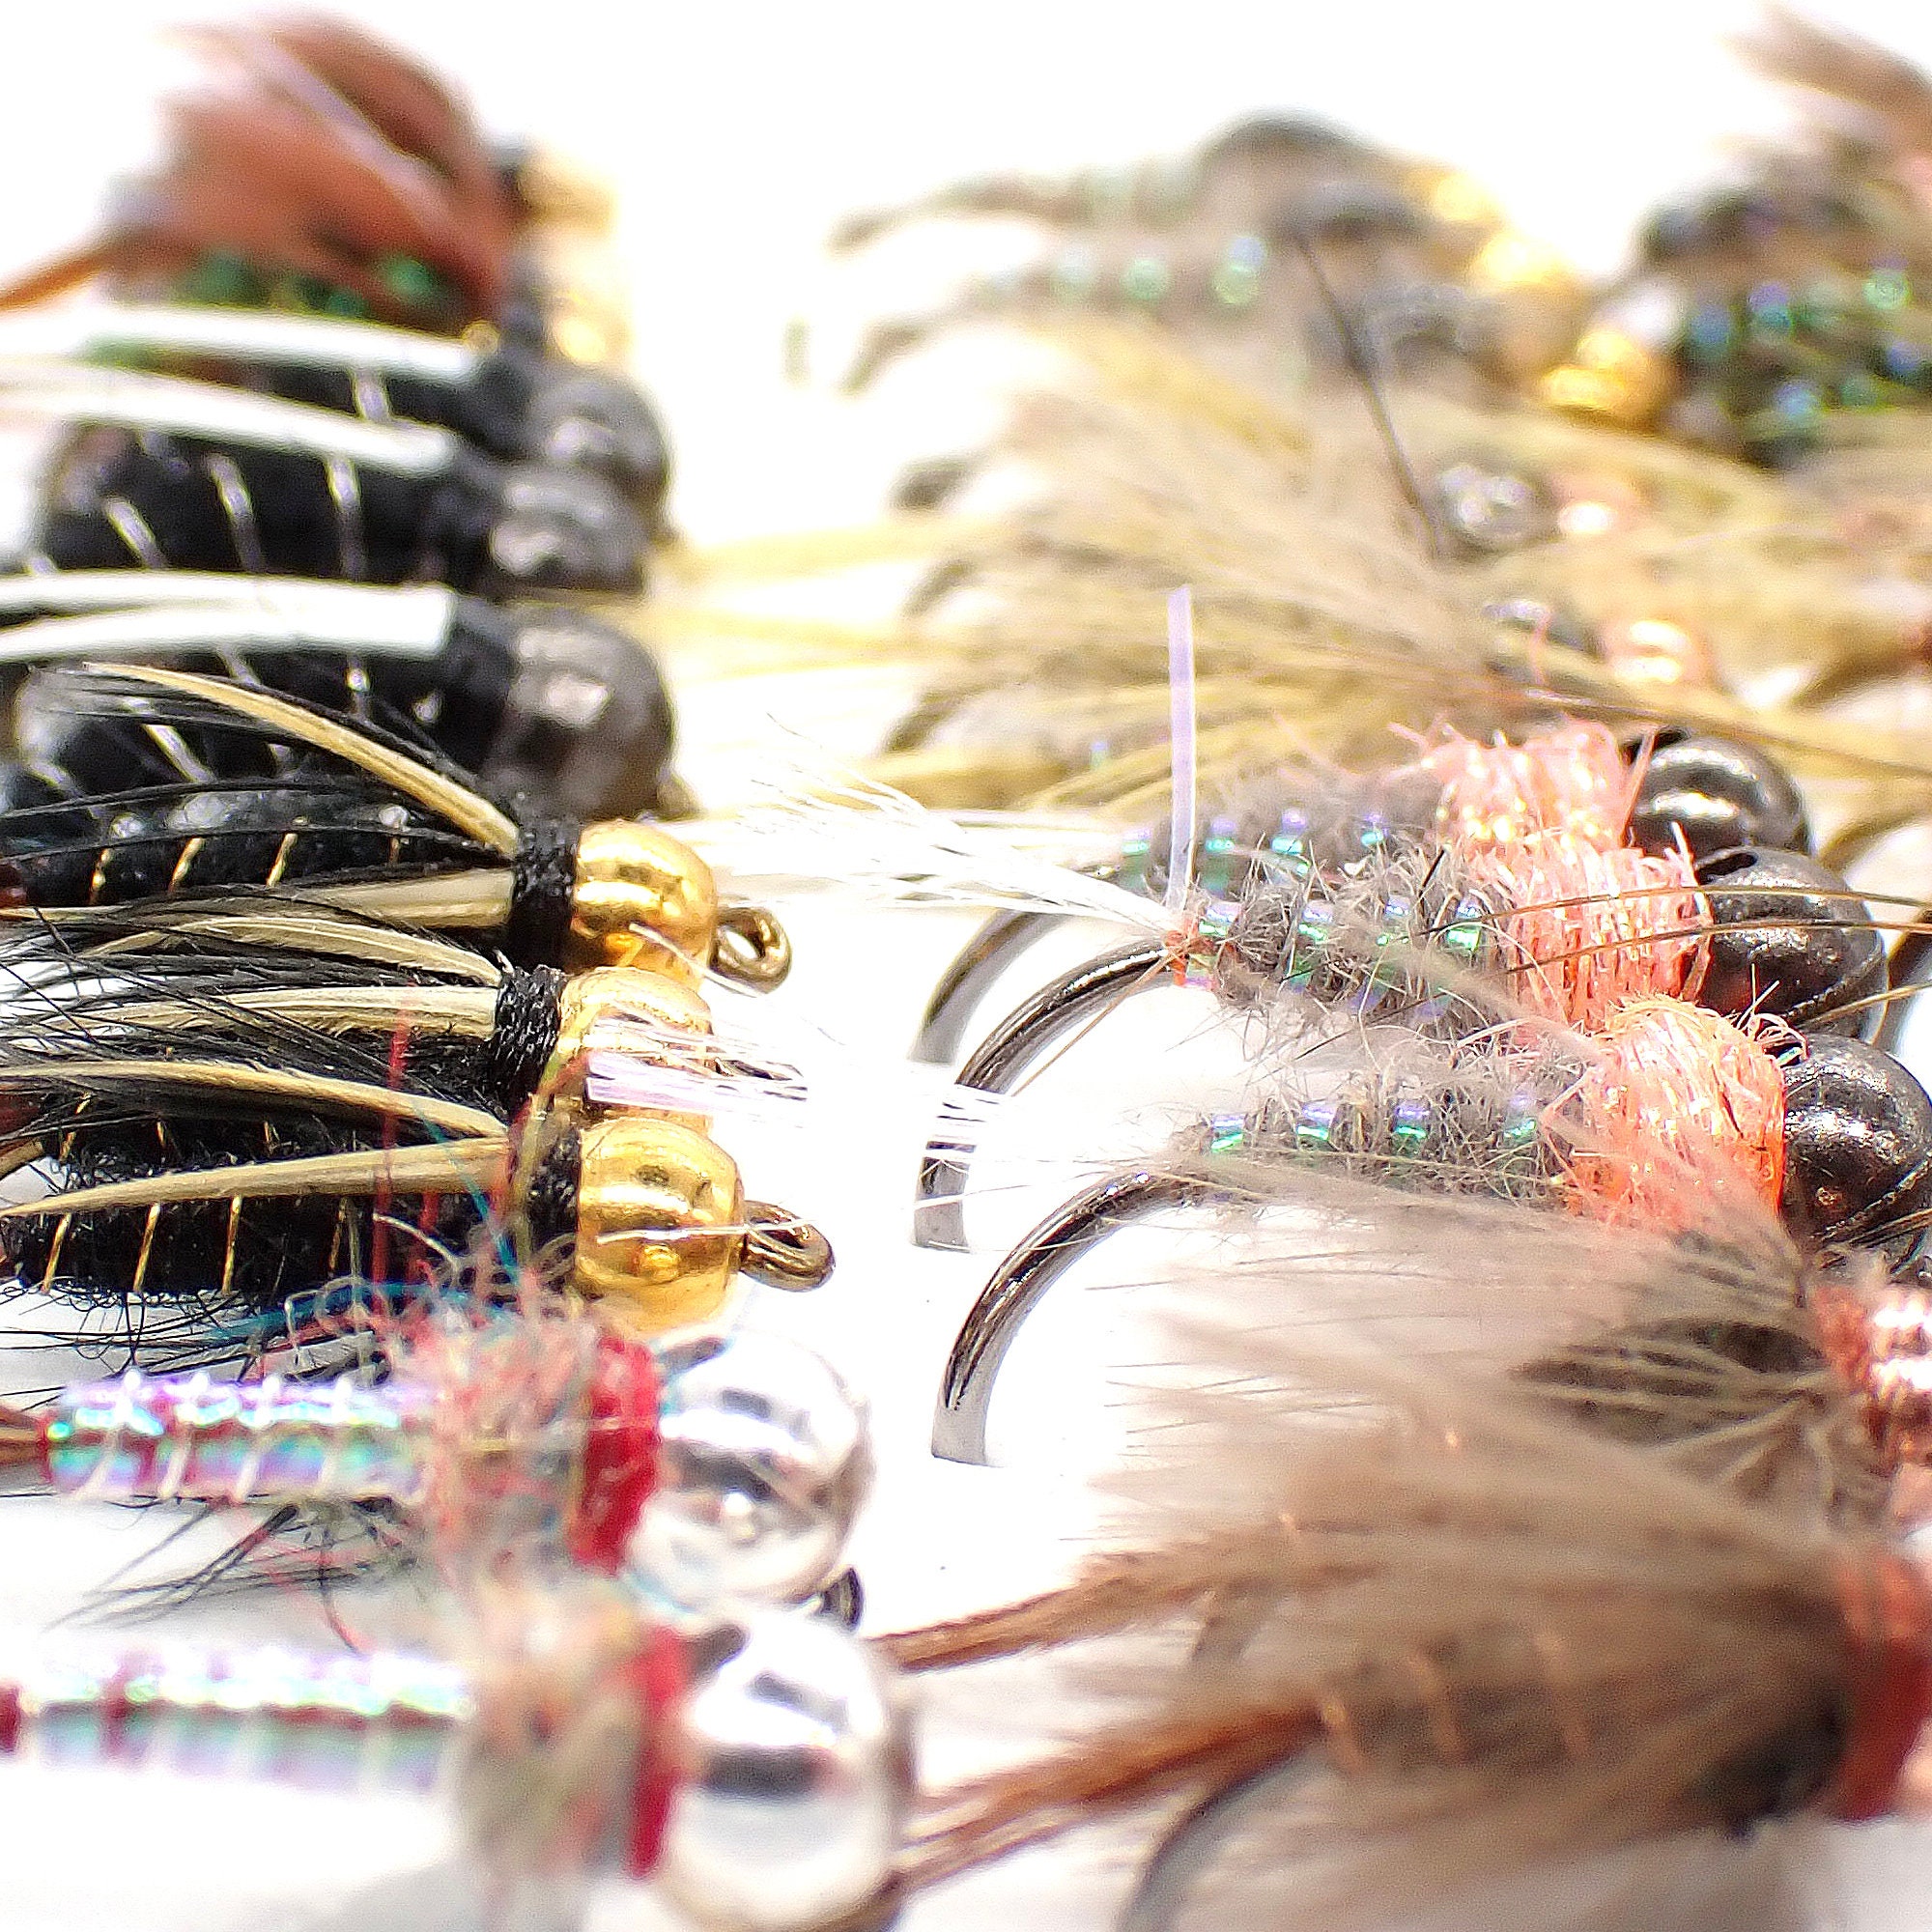 Fly Fishing Flies Pat's Rubber Legs Olive and Brown Fly Fishing Gifts 3  Pack of Flies for Trout Nymph Flies -  Singapore